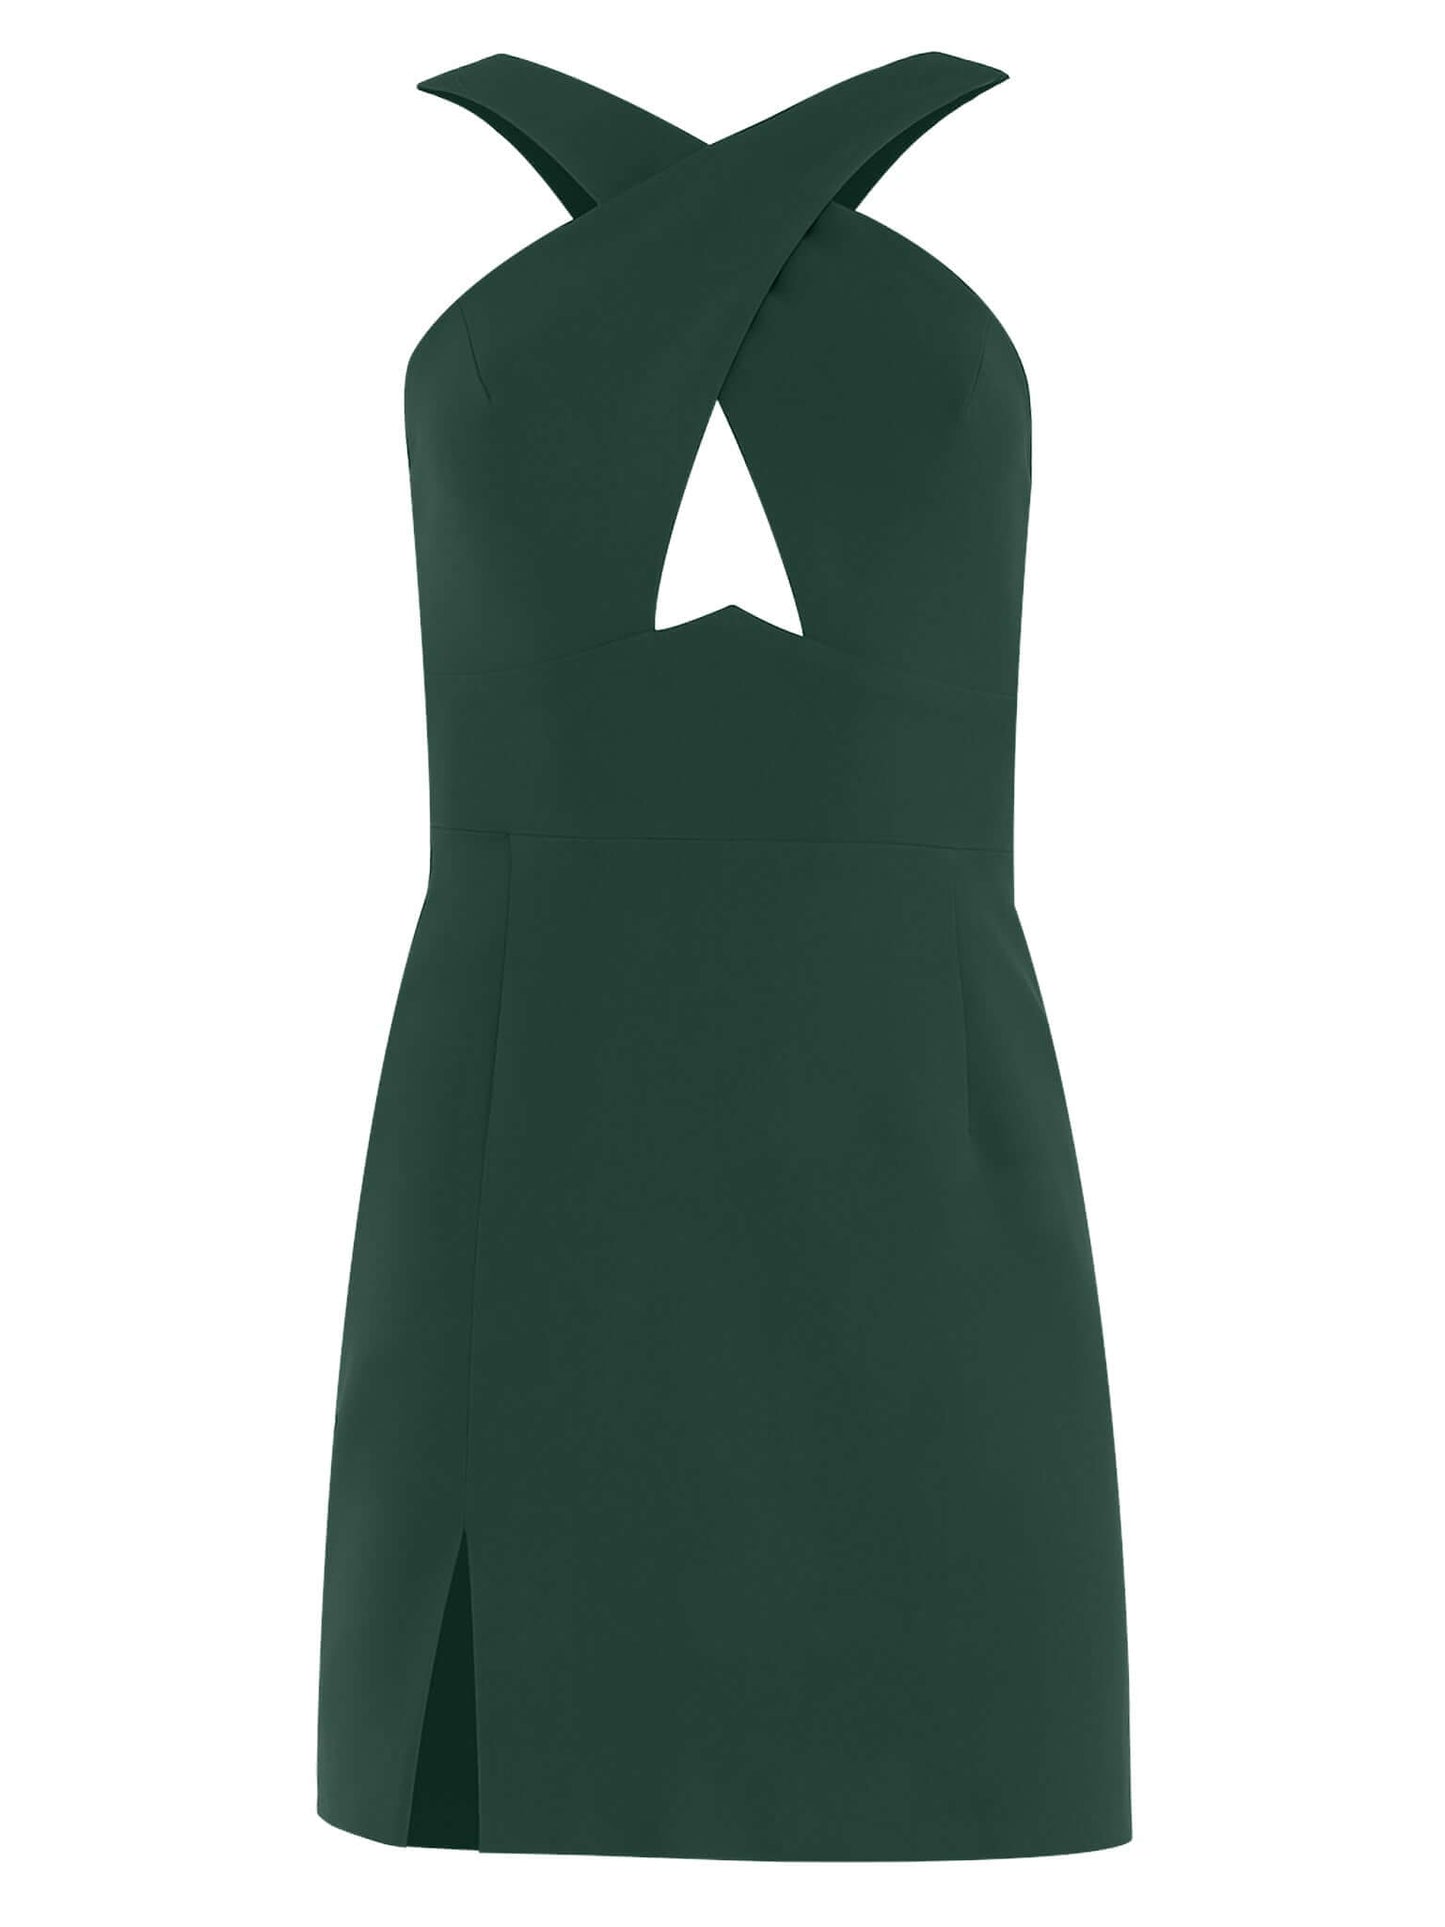 Tia Dorraine Burning Desire Cross-Neck Cut Out Mini Dress - Green This mini dress arrives with a cross-neck design and a deconstructed aesthetic thanks to the sexy cut-out waist detail. The dress also includes a playful front slit detail and is fully line